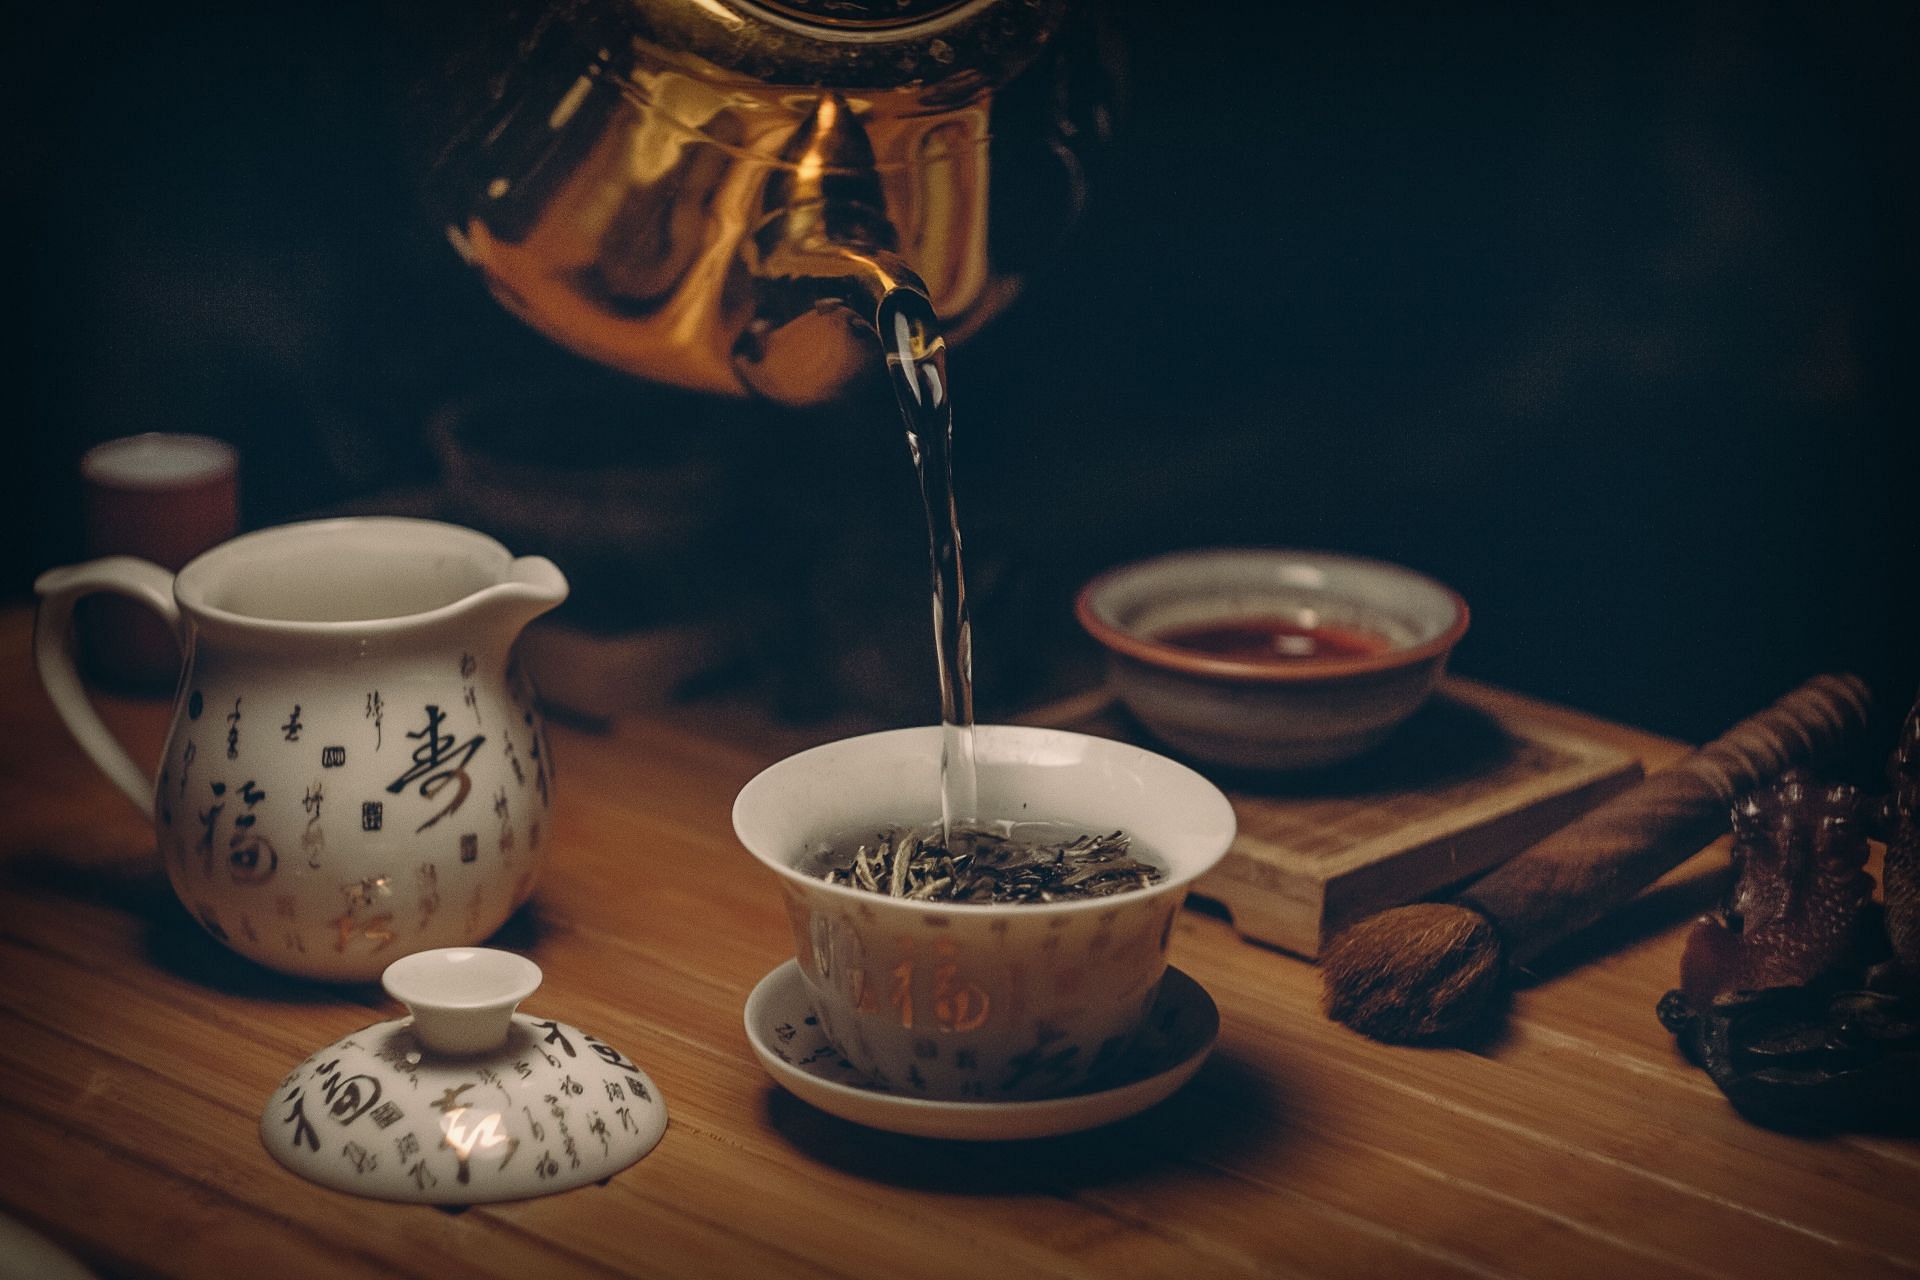 Black tea is less in calories and can help with weight loss. (Image via Pexels/Nikolay Osmachko)